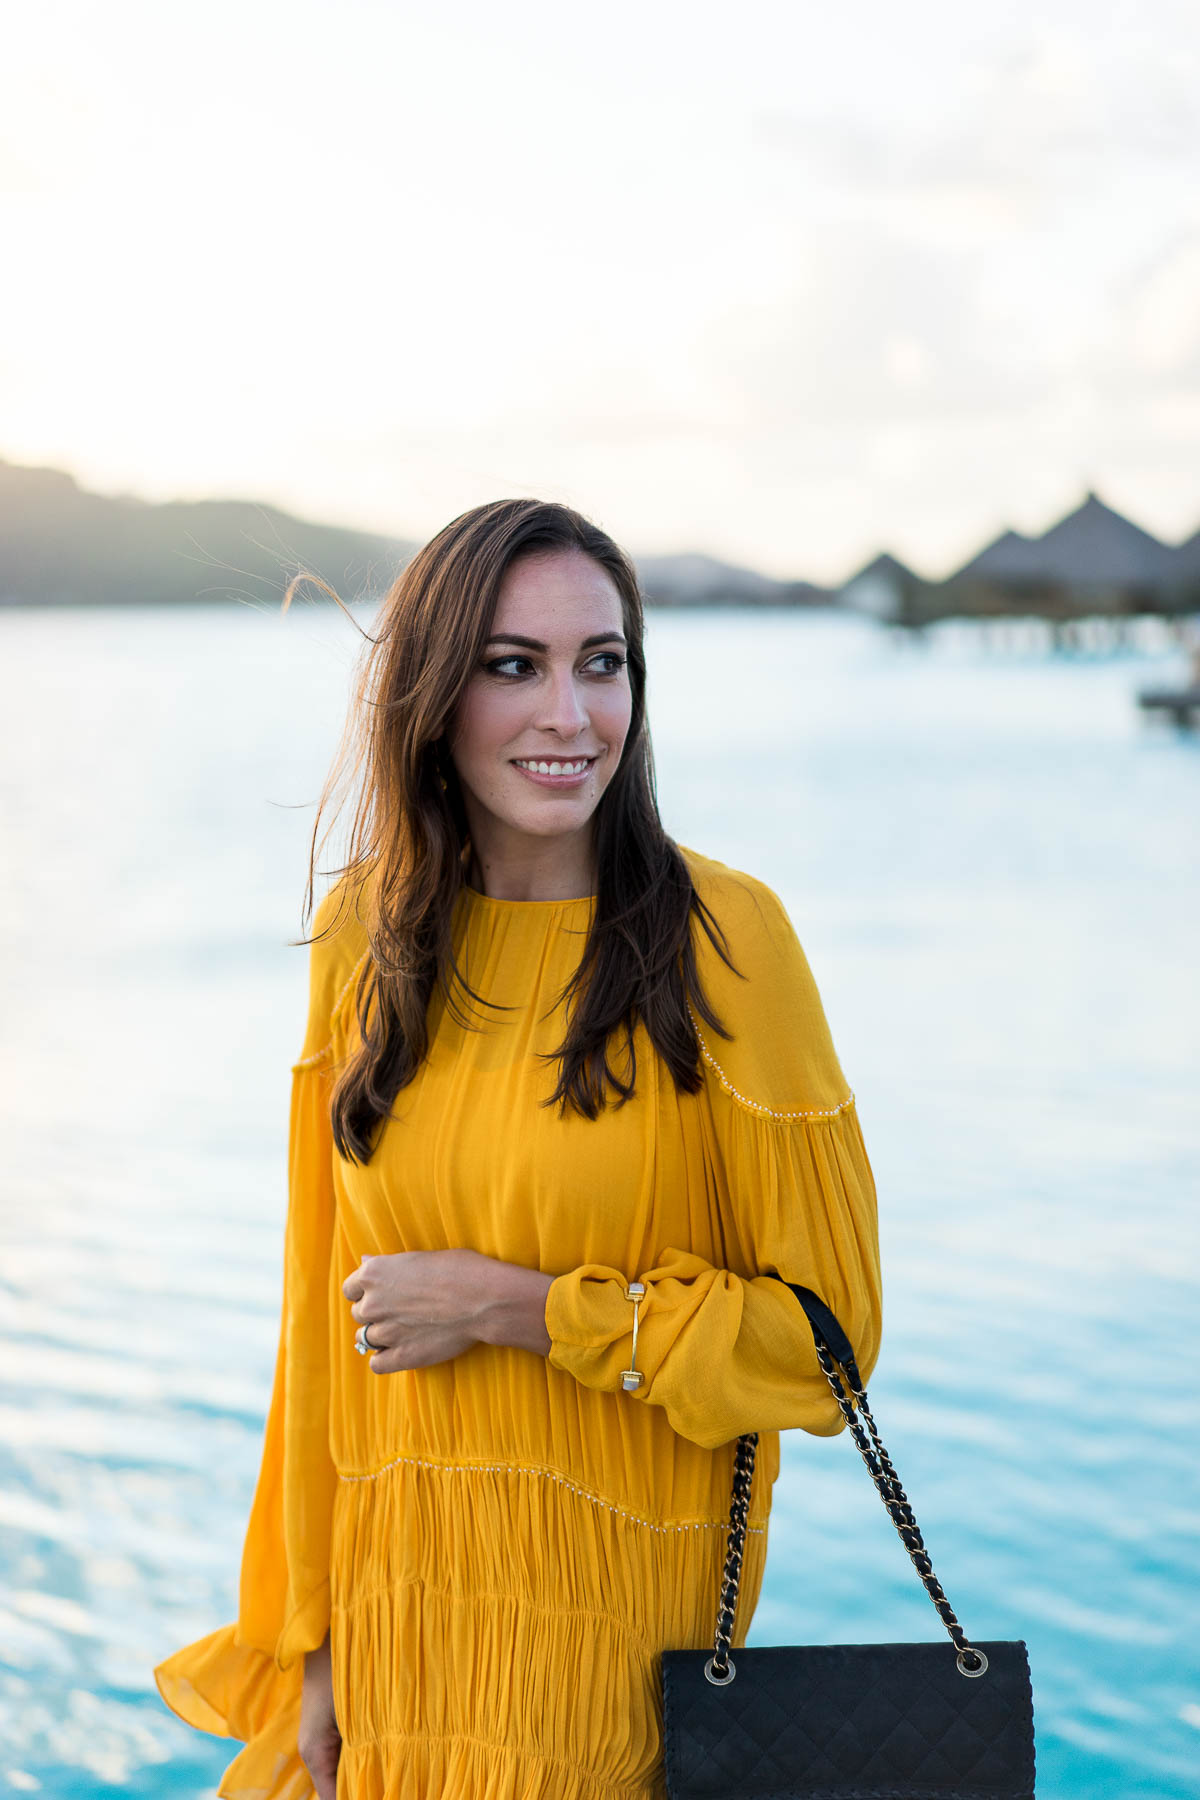 Amanda from A Glam Lifestyle wears mustard yellow dress and classic Chanel bag on honeymoon